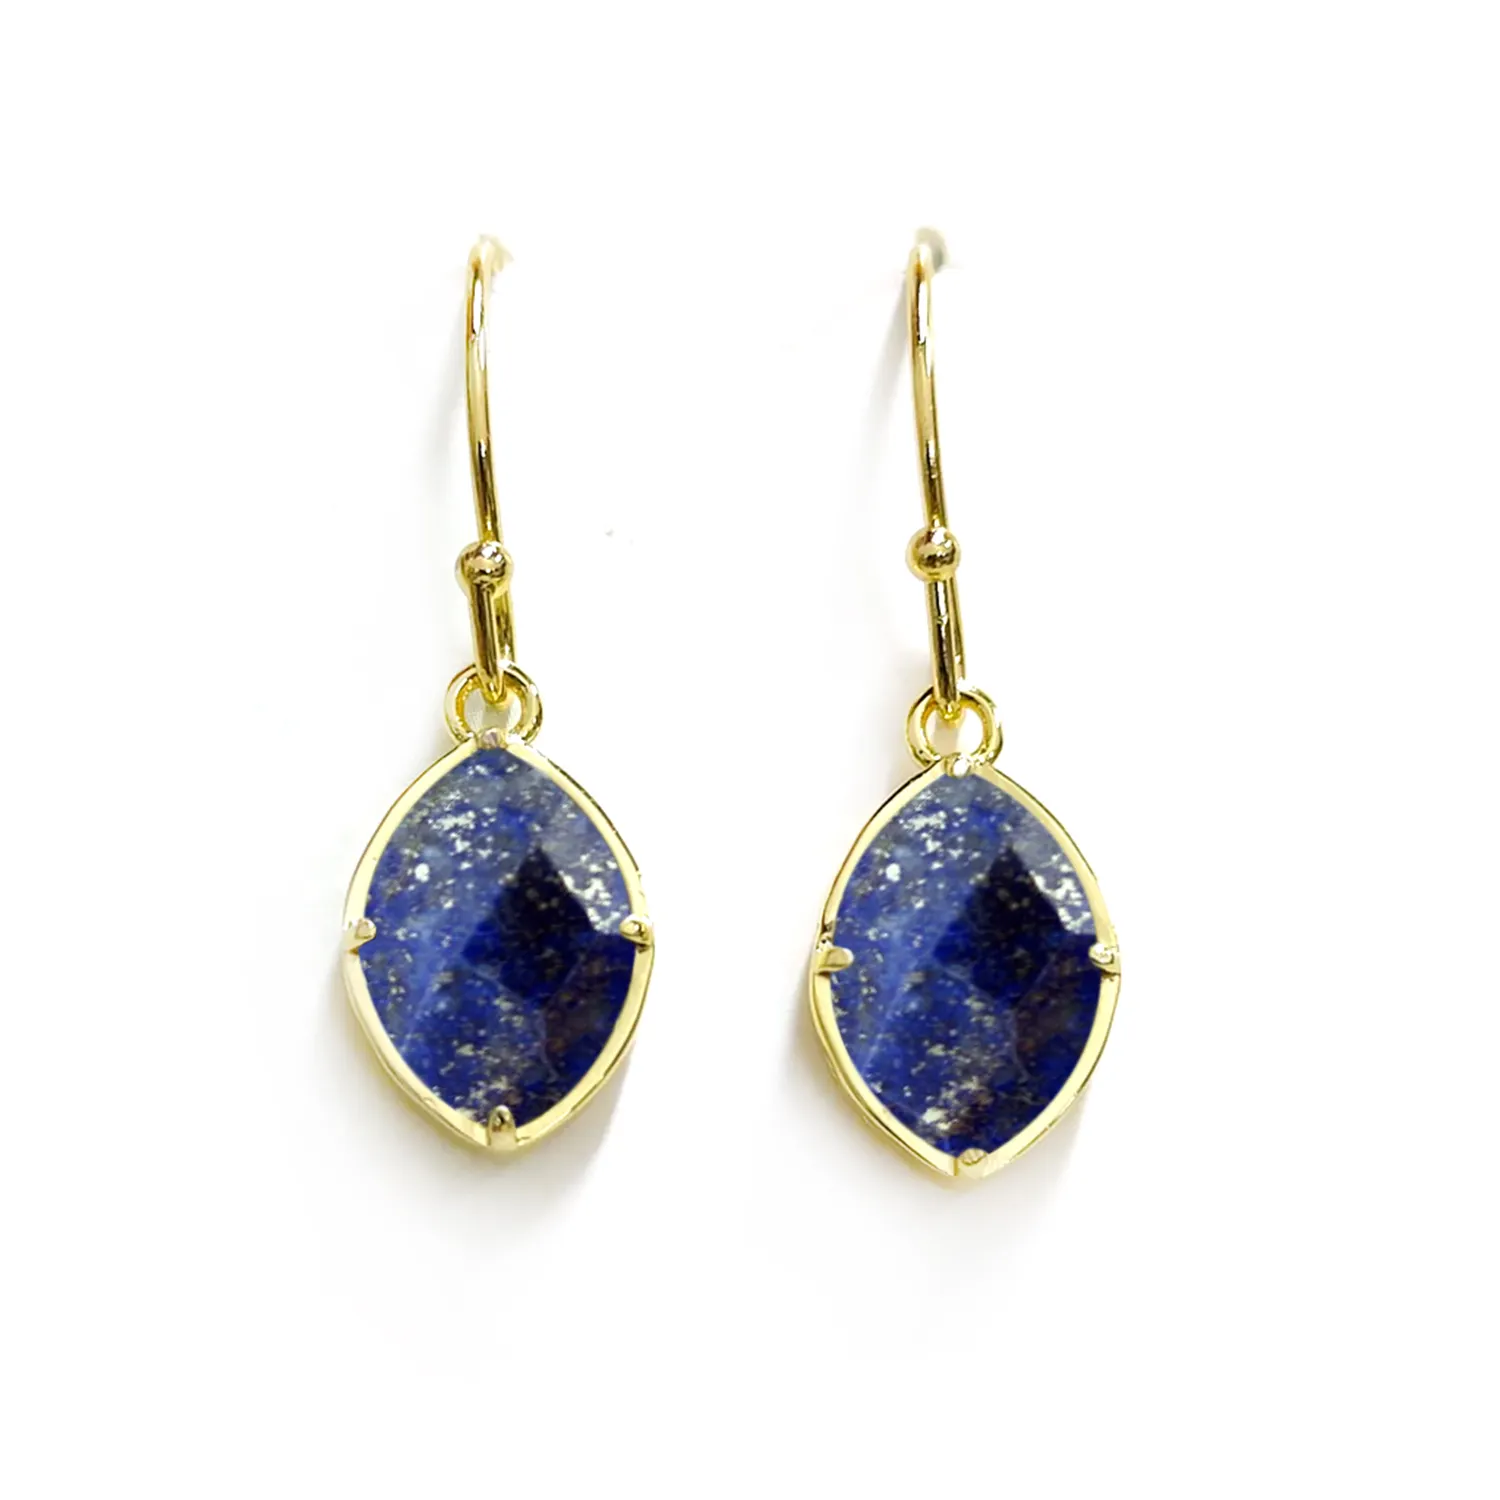 Wholesale 925 Sterling Silver Marquise Lapis Lazuli Earrings Gold Vermeil - Prong Set Gemstones for Women's Jewelry Collection